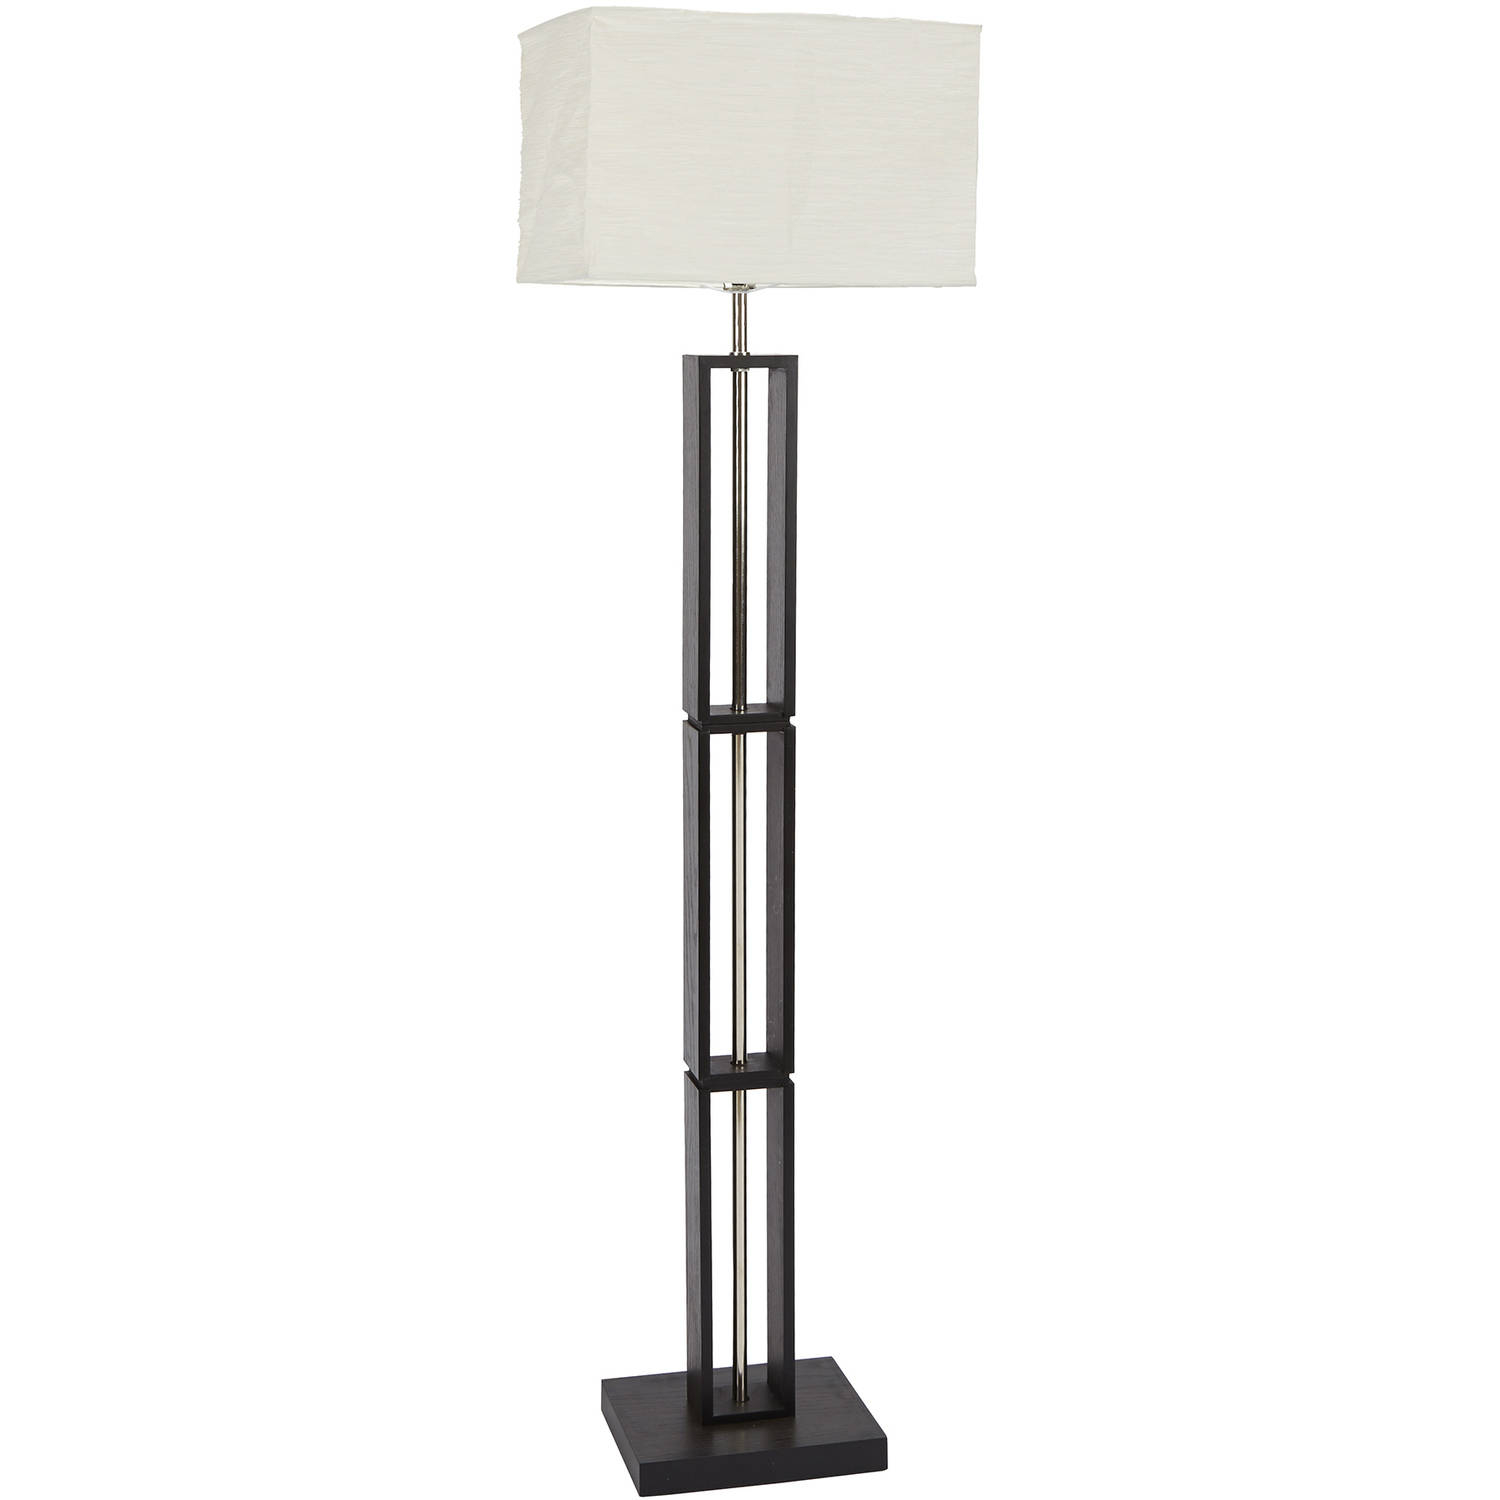 Mainstays Dark Wood Floor Lamp With Rice Paper Shade Walmart within sizing 1500 X 1500